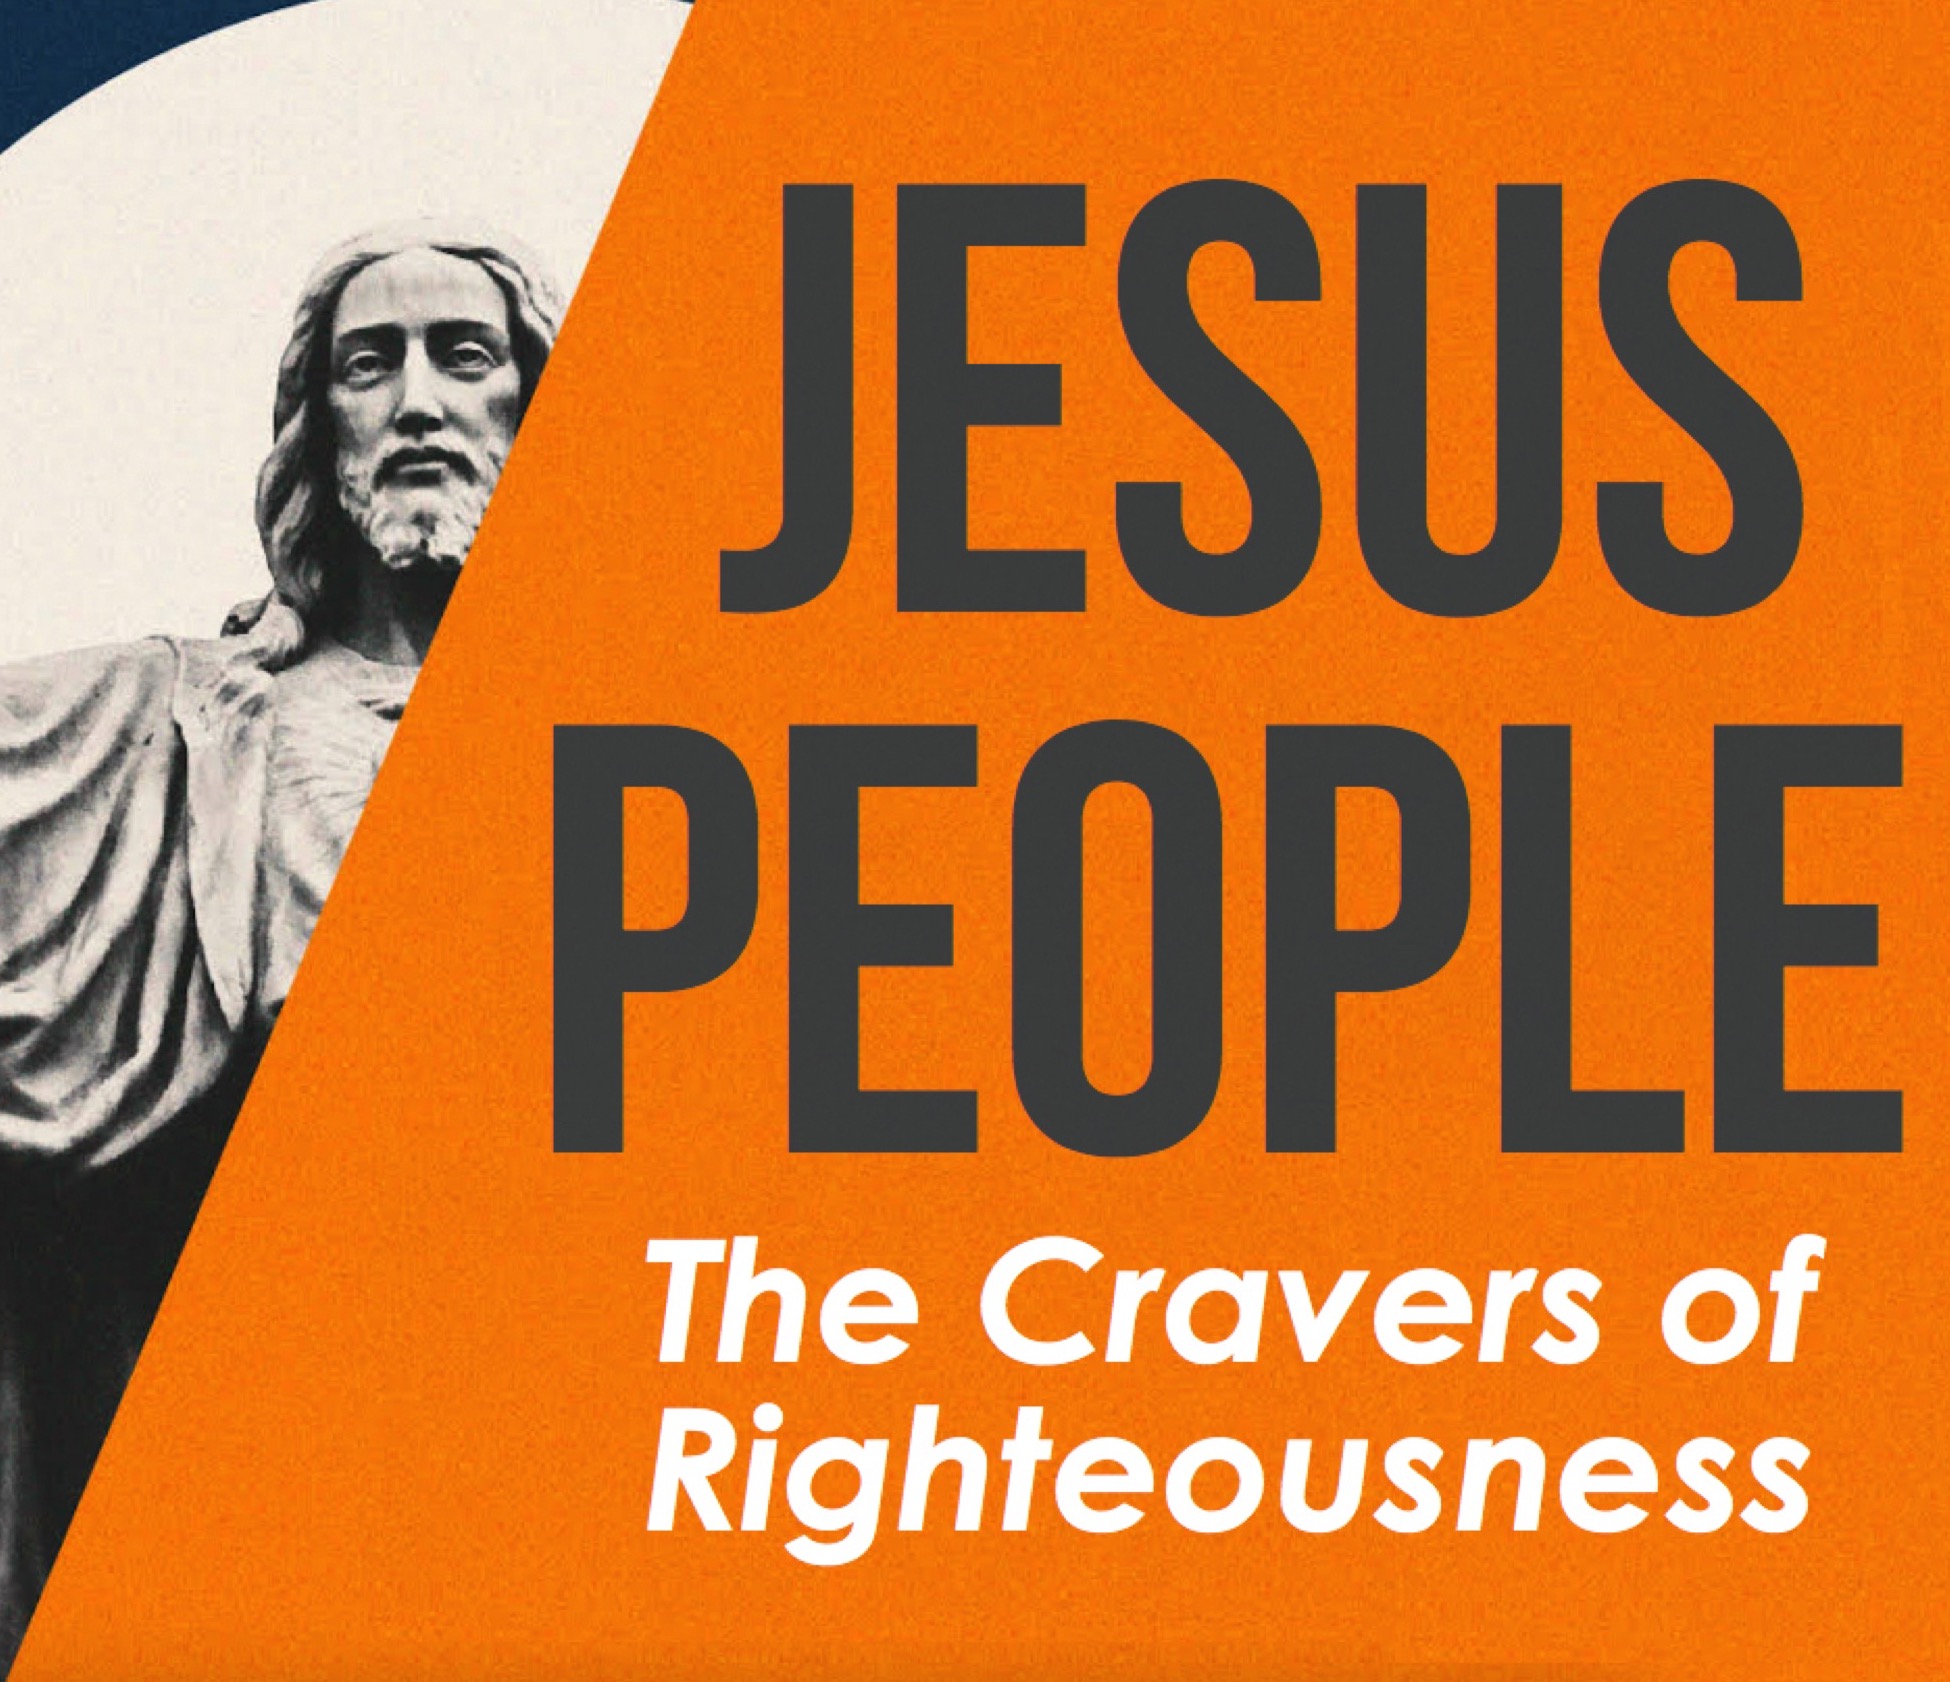 Ryan Post - "The Cravers of Righteousness"